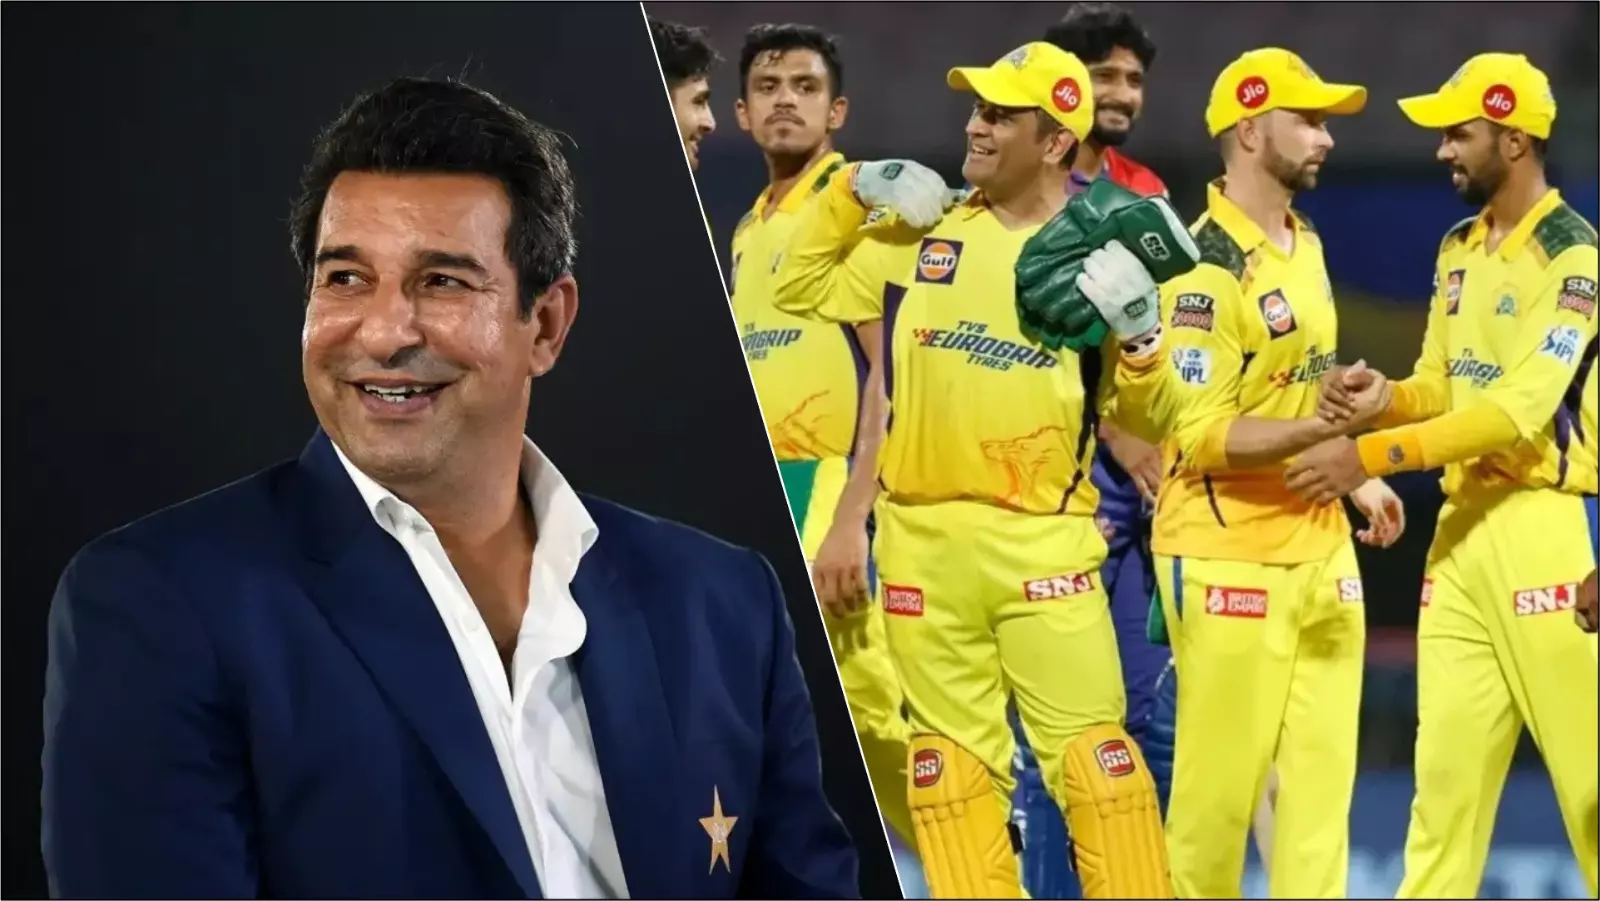 MS Dhoni could still play for India if he did not, Pk Cricketer Wasim Akram brave claim on CSK skipper